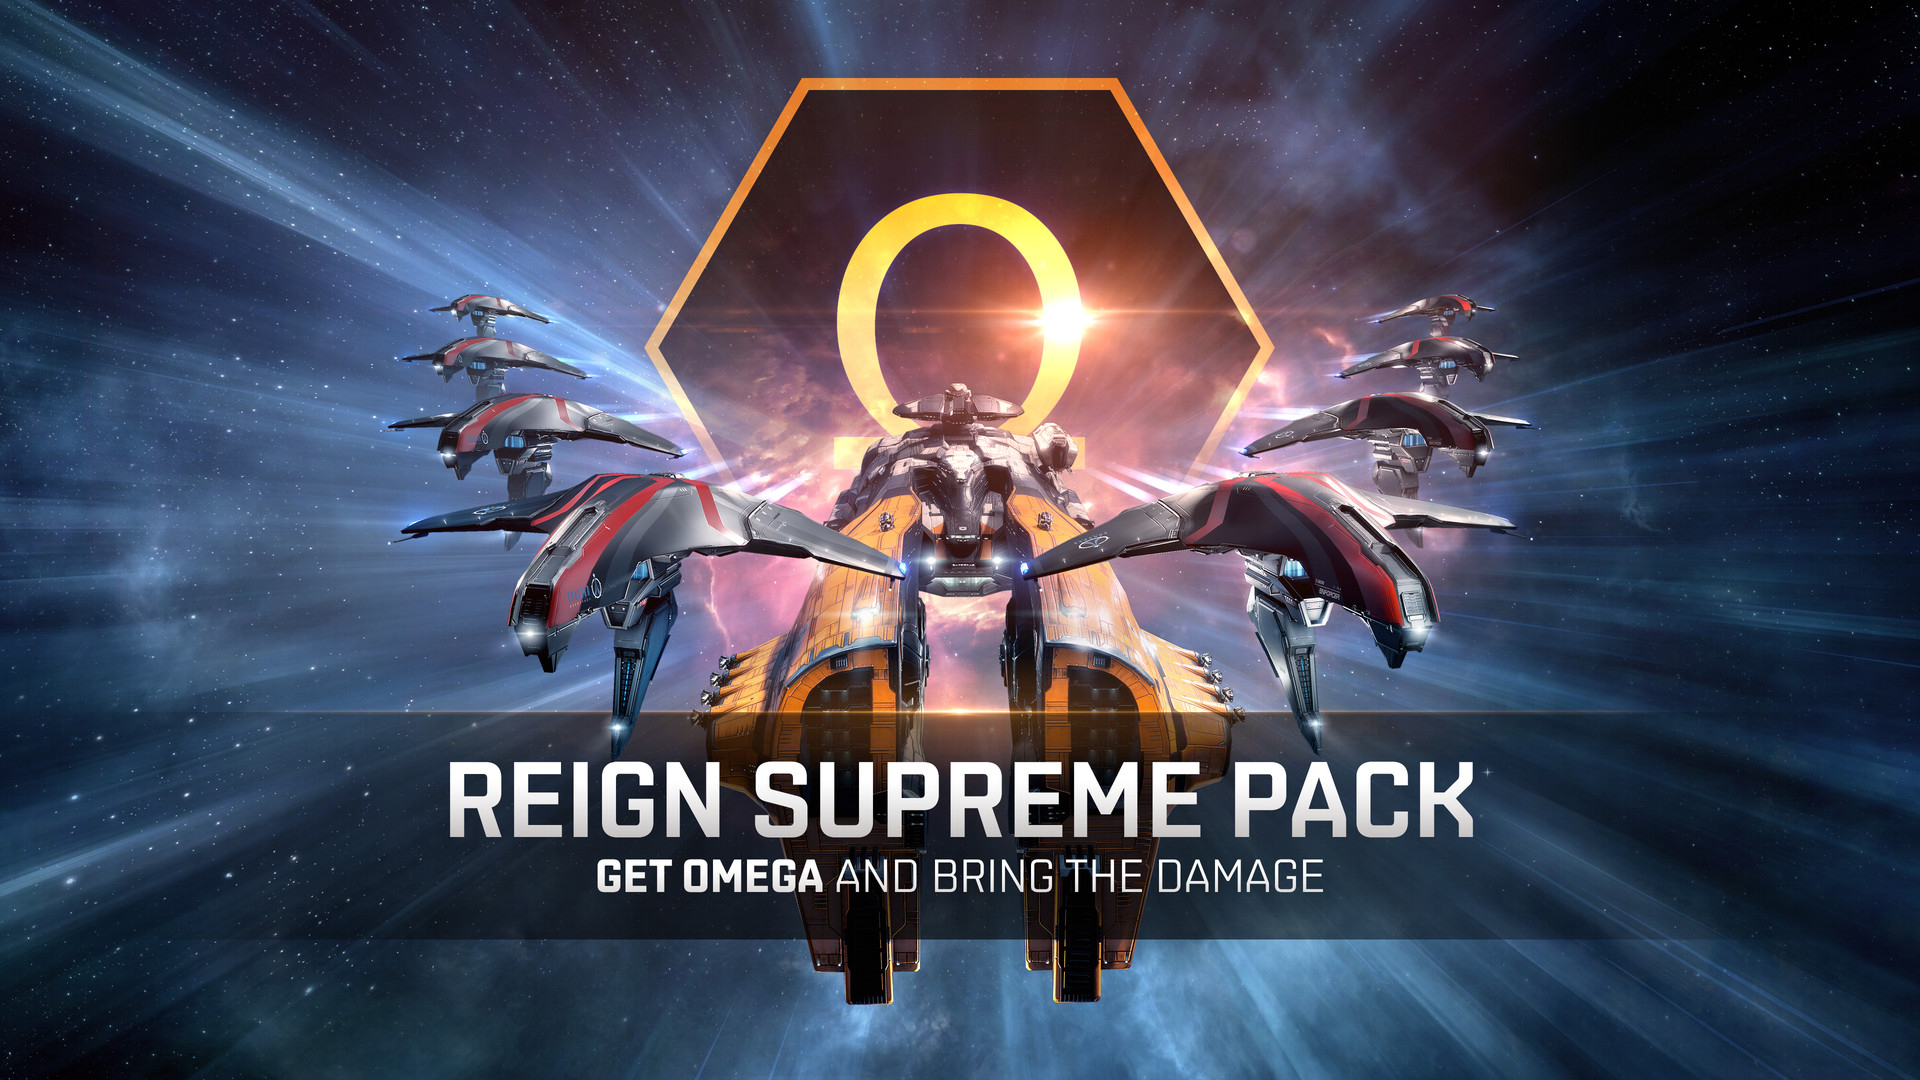 EVE Online: Reign Supreme Pack Featured Screenshot #1